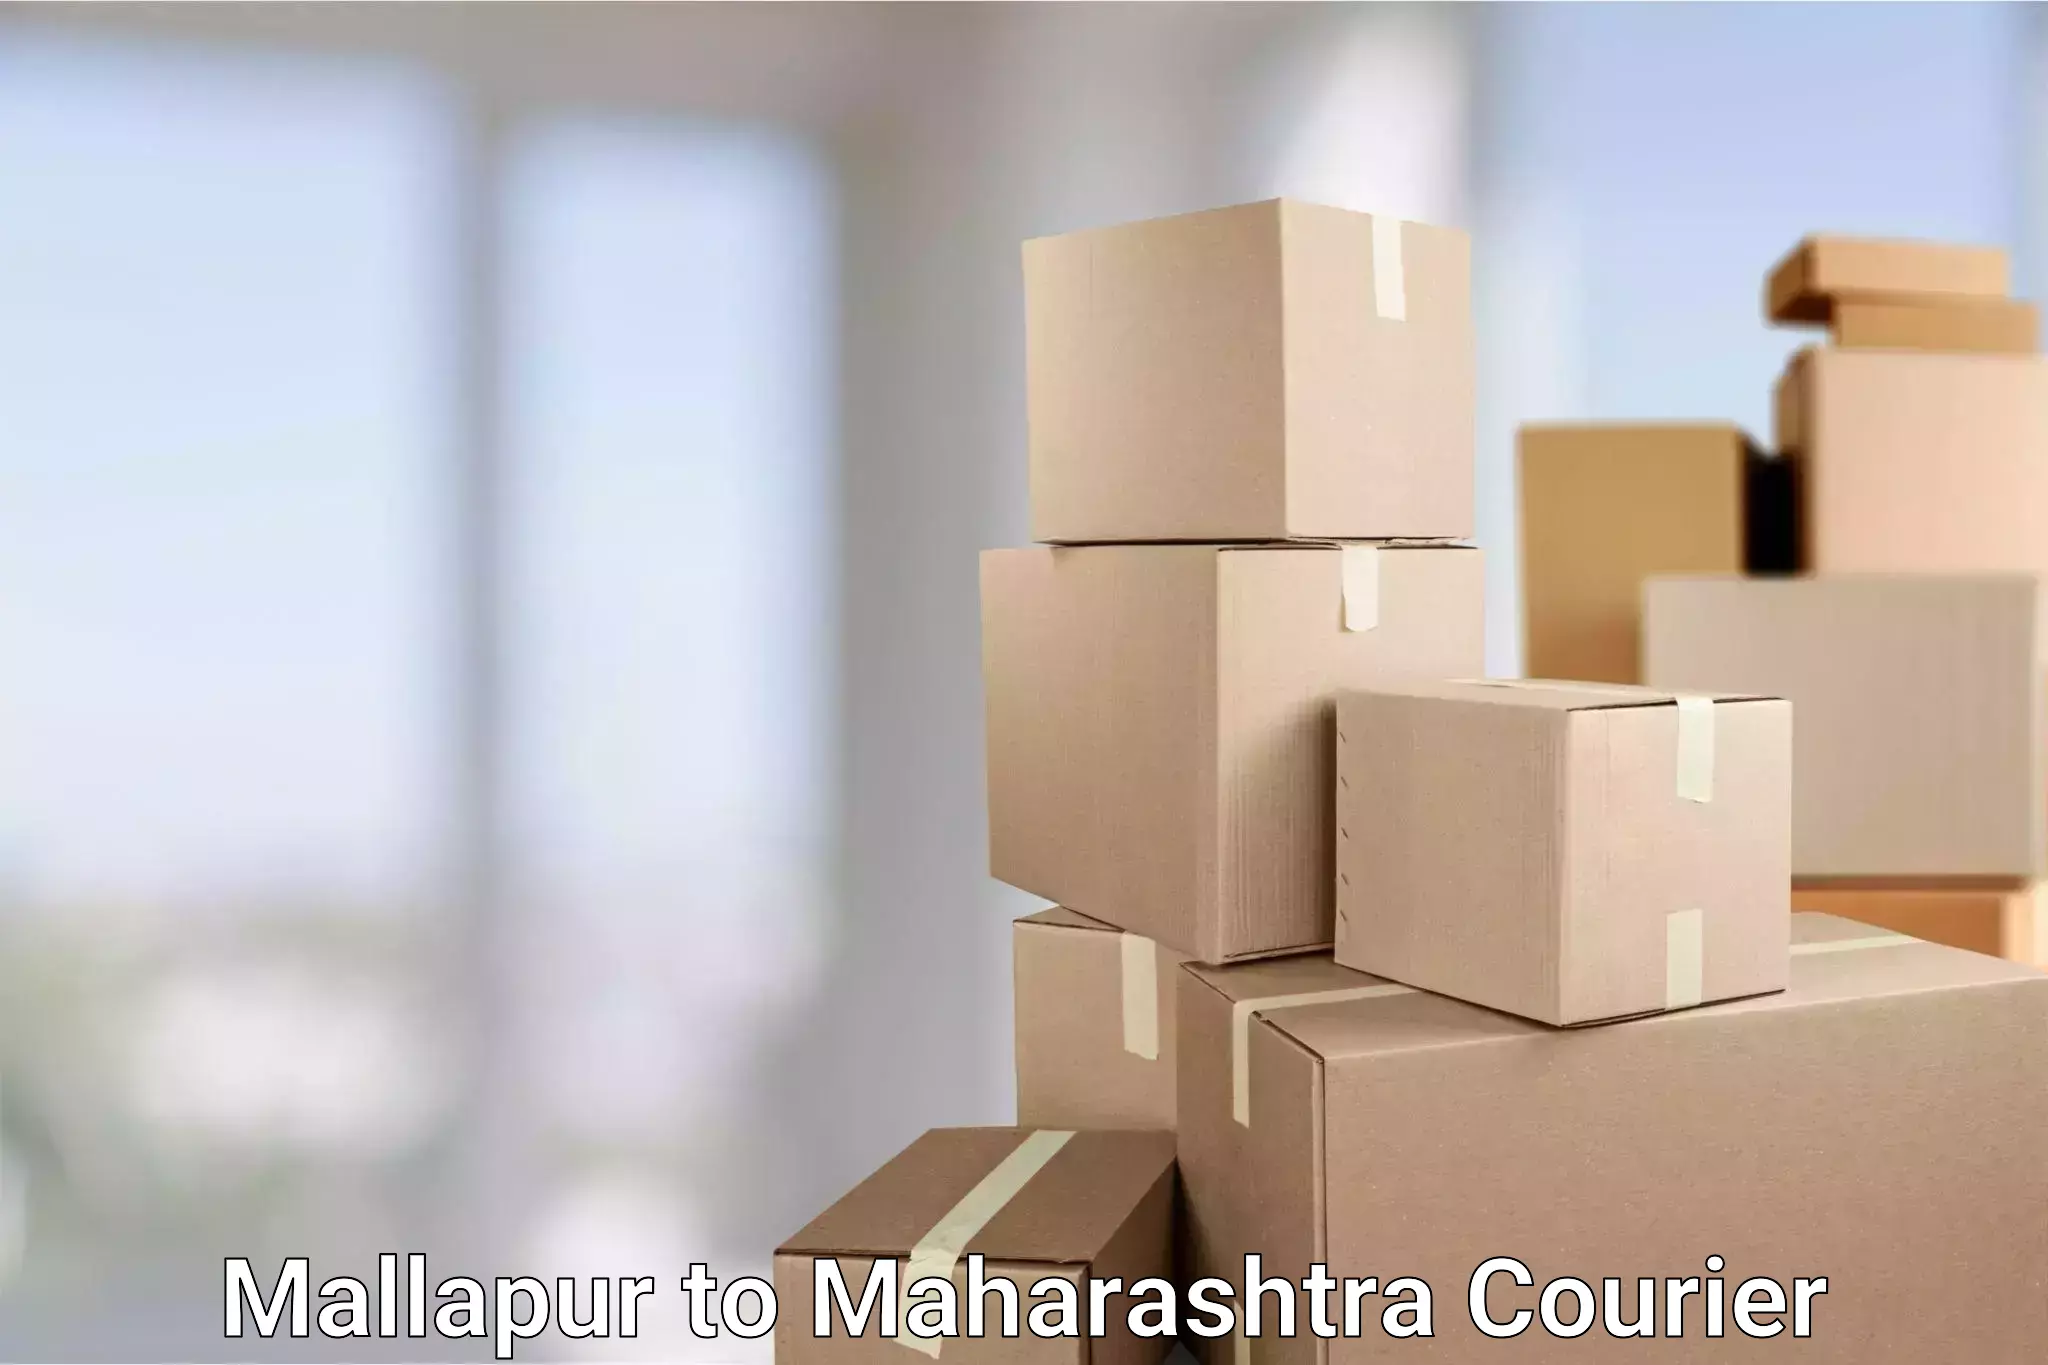 Comprehensive parcel tracking in Mallapur to Maharashtra